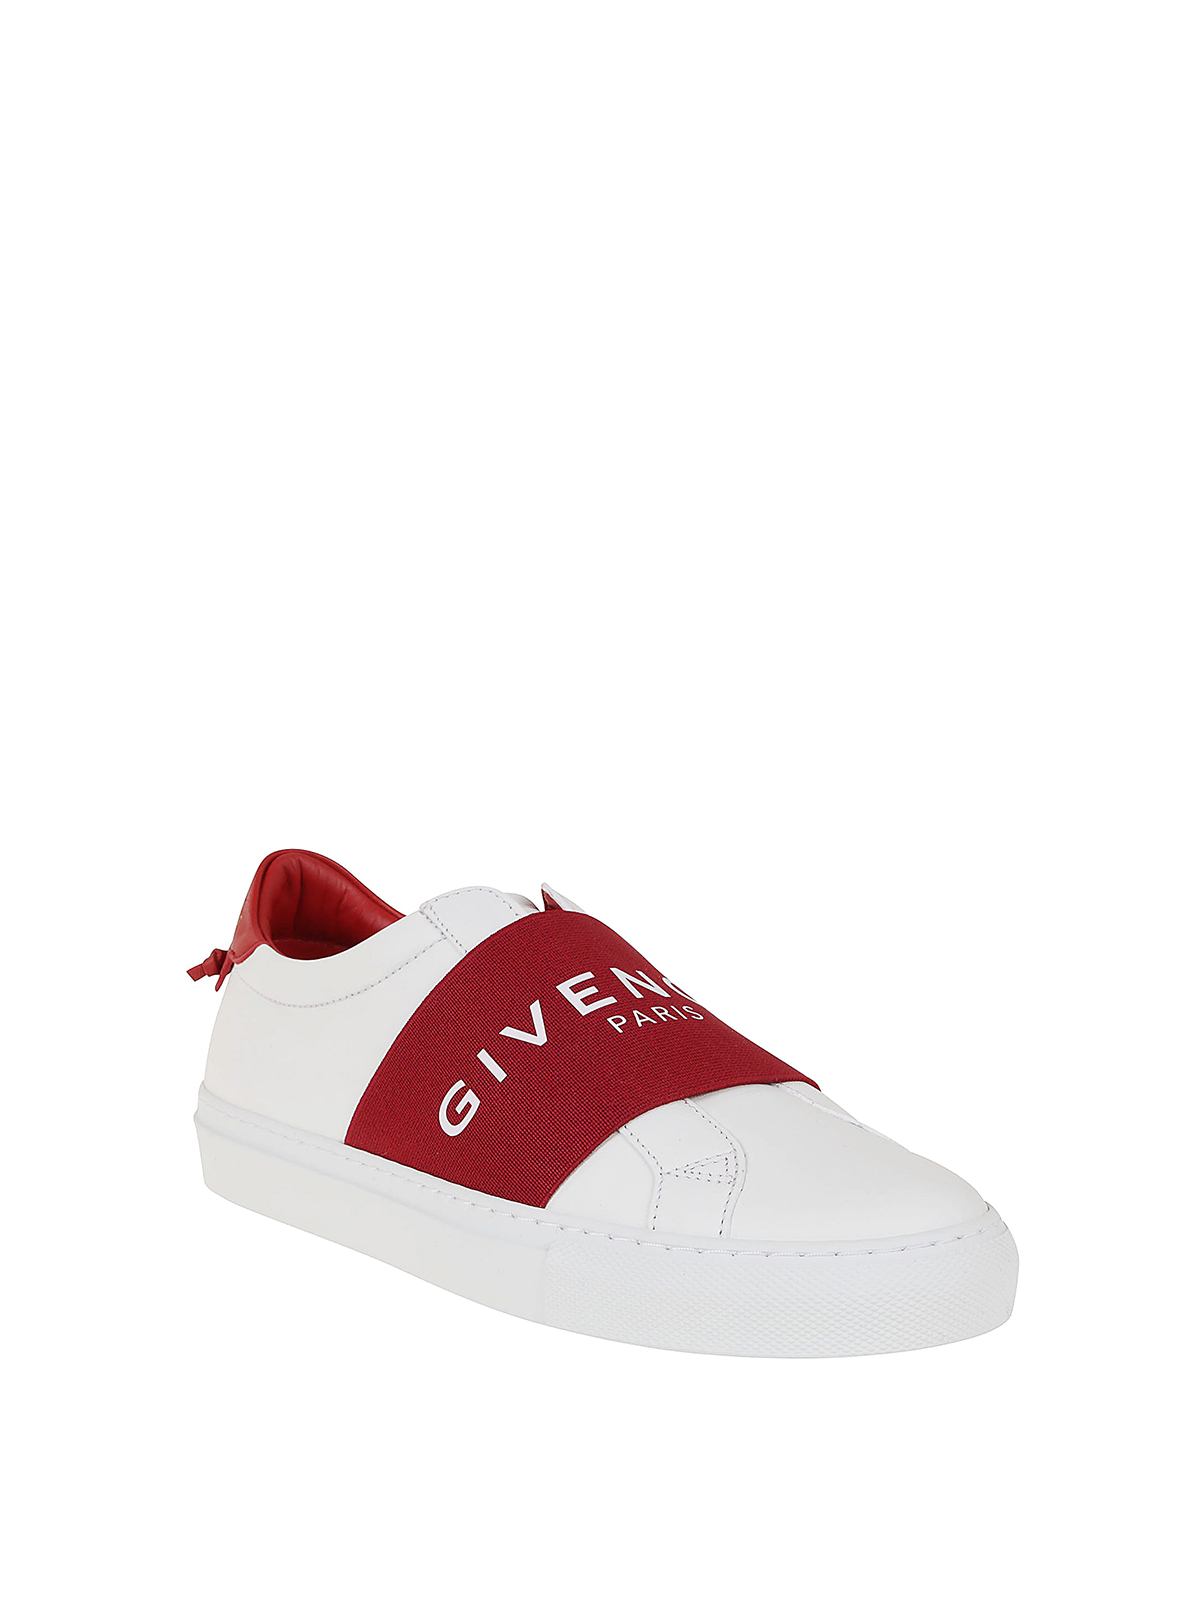 Givenchy - Urban Street leather and 